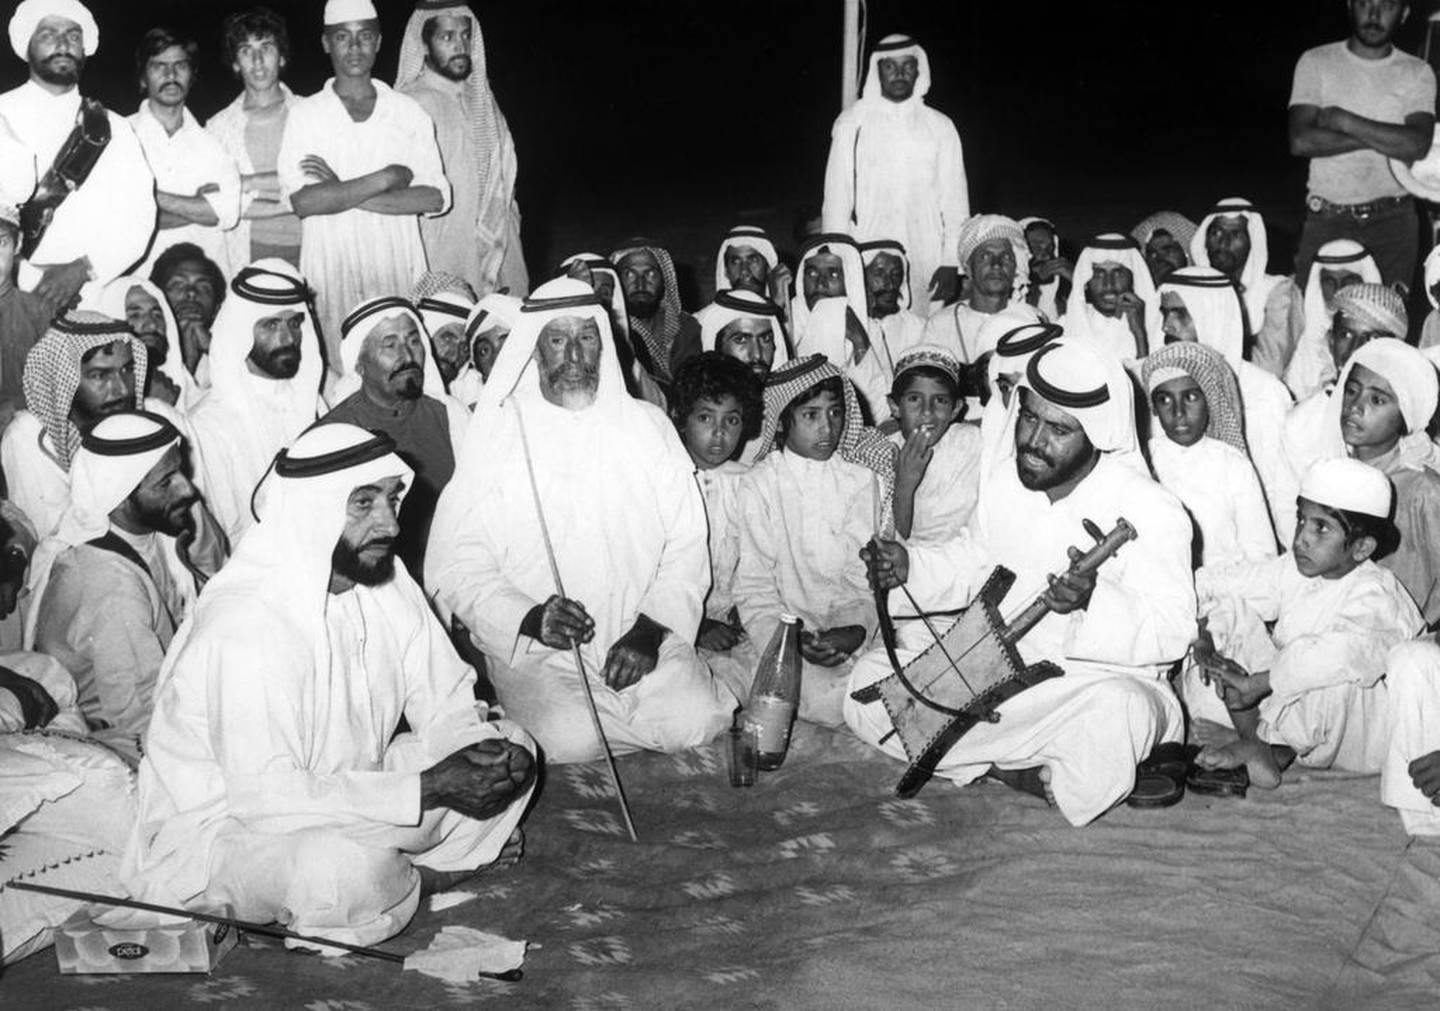 Sheikh Zayed, the Founding Father, meets citizens in Ghayathi in 1976. Mike Pompeo fails to take account other forms of democratic consultation, such as the majlis in the Arabian Gulf.